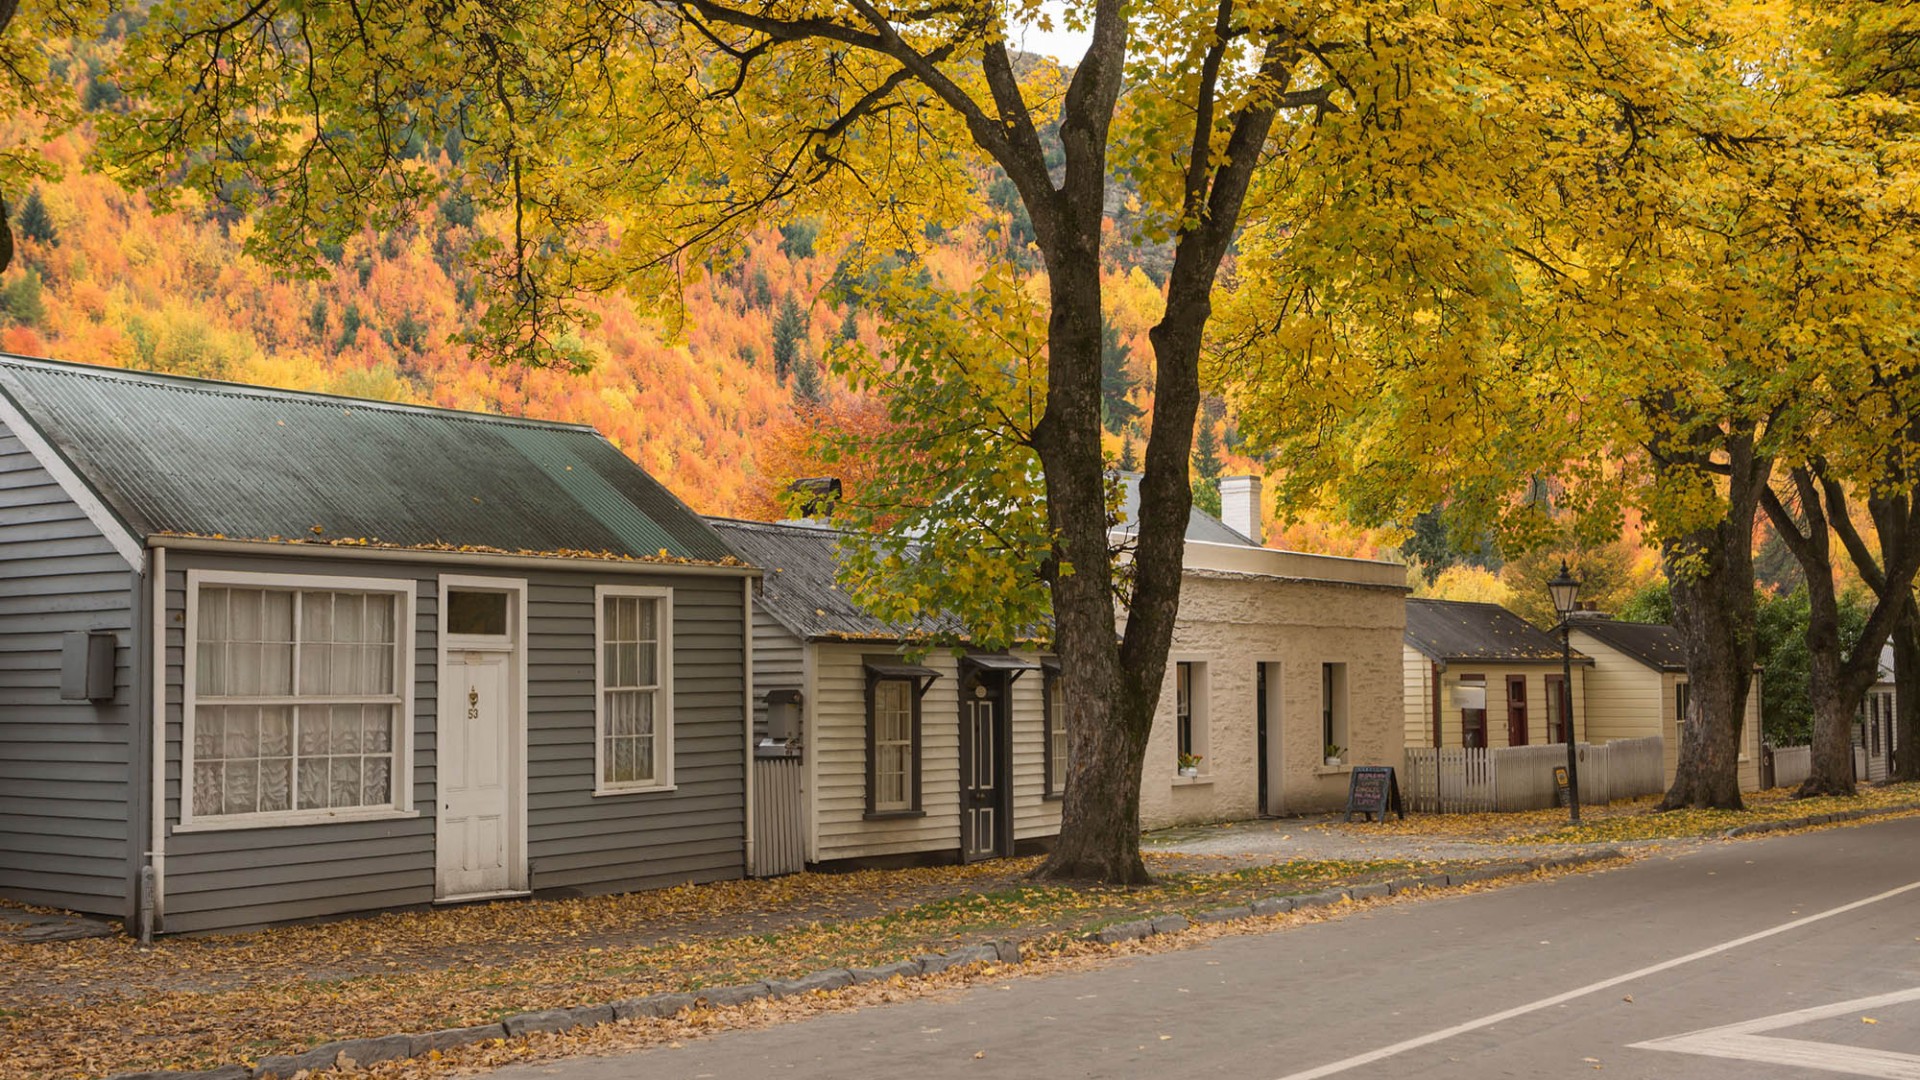 Arrowtown Miners Cottages In Autumn. Pic courtesy Arrowtown Promotion and Business Association